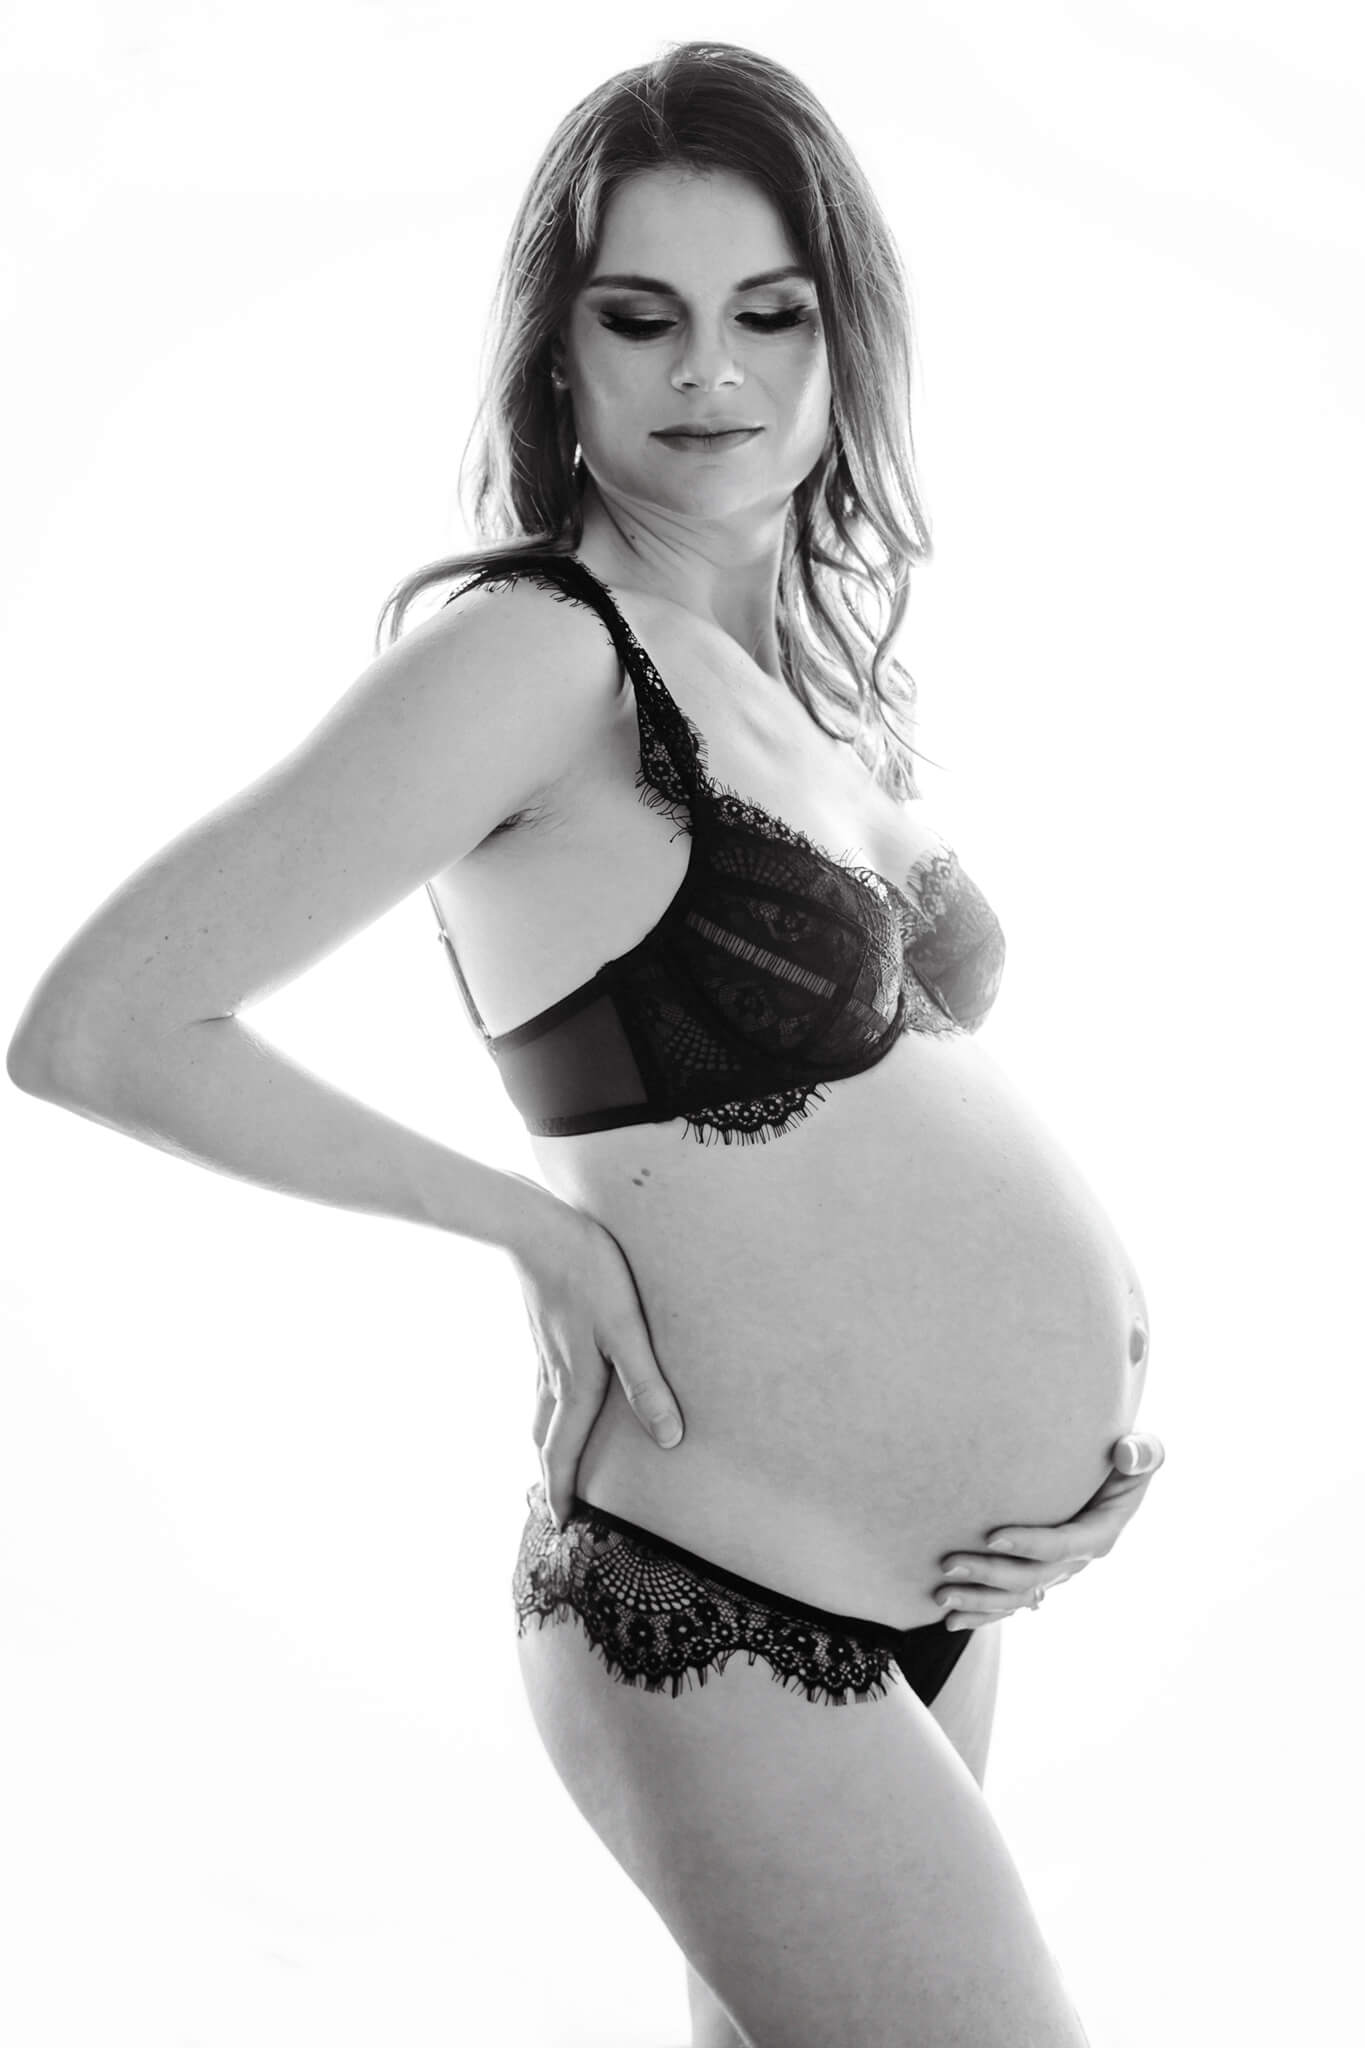 A mother to be stands in a studio holding her bump in lace lingerie